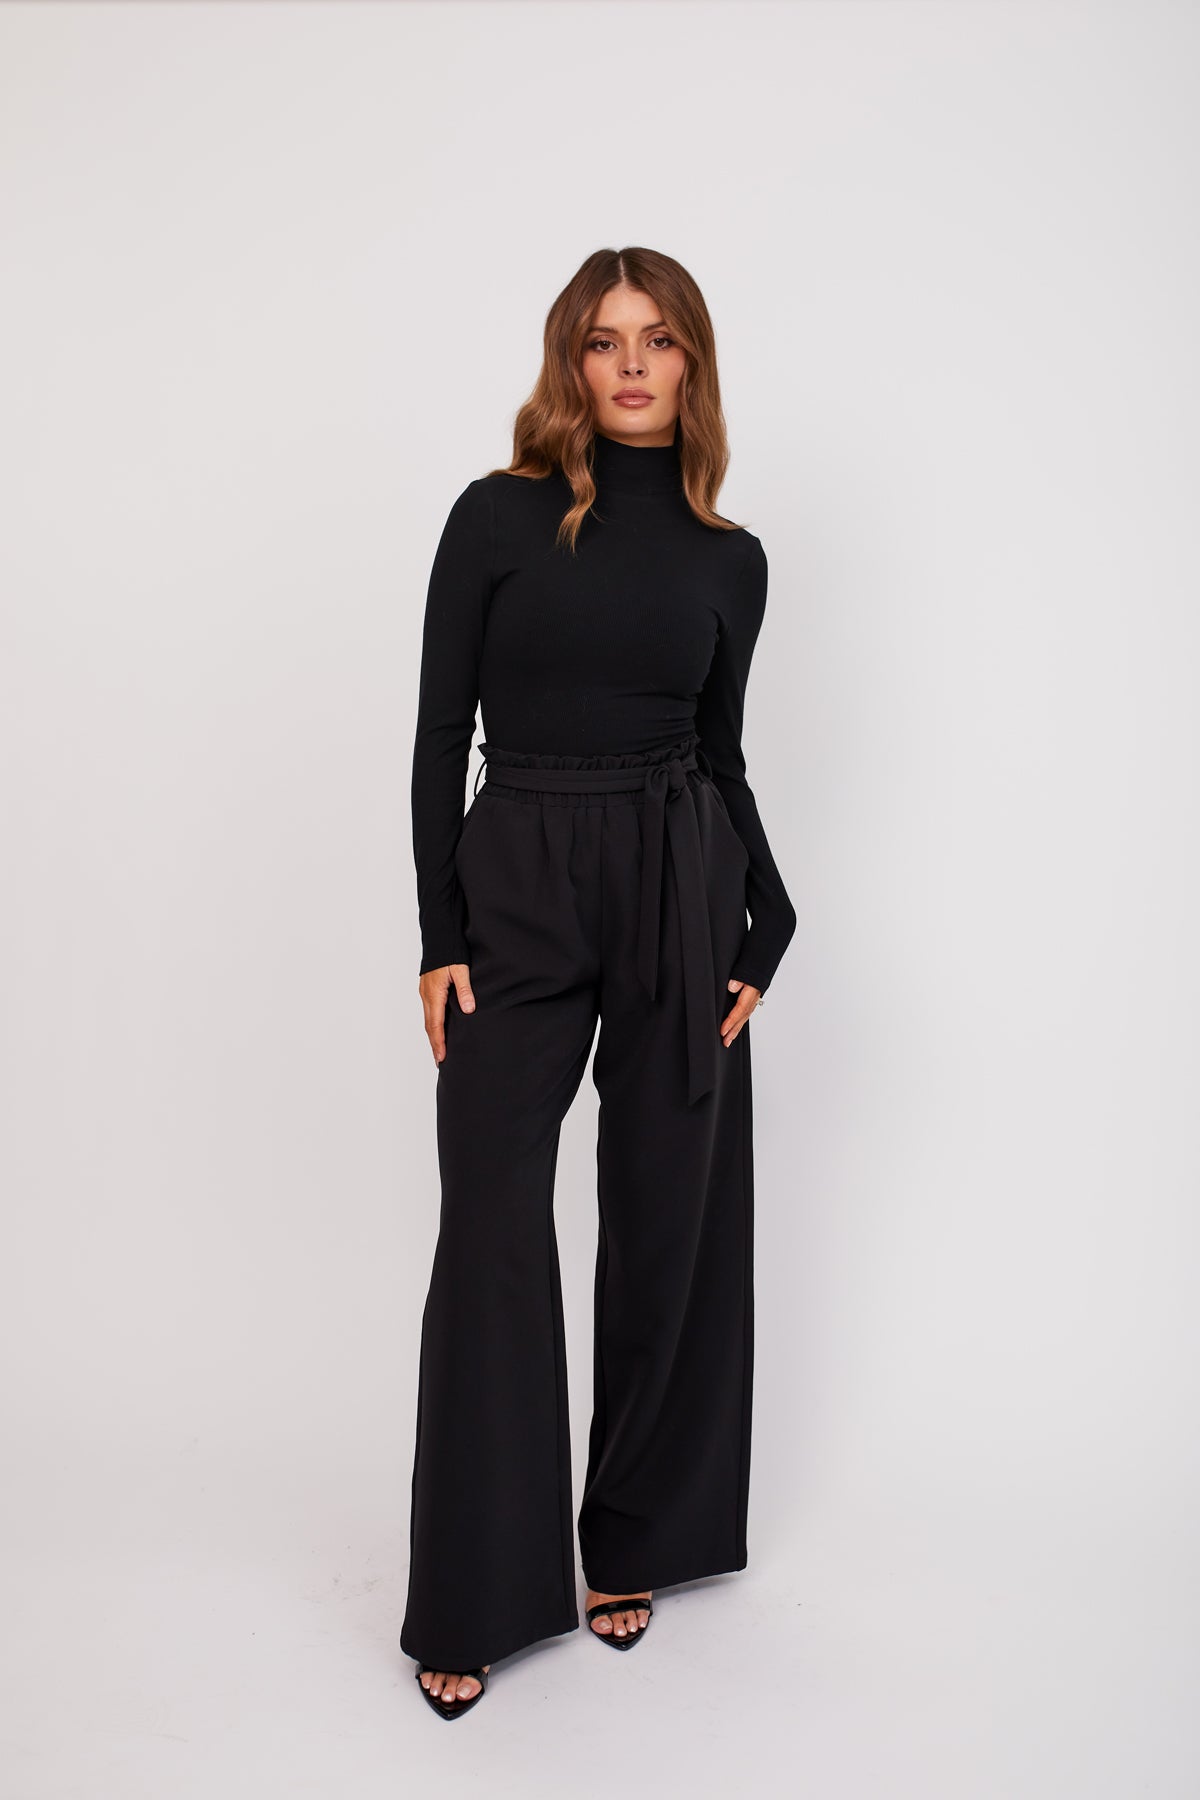 Double Breasted Fold Pleated Tailored Trousers | Women Pants Casual Classy  | Trousers for girls, Formal trousers women, Pants for women